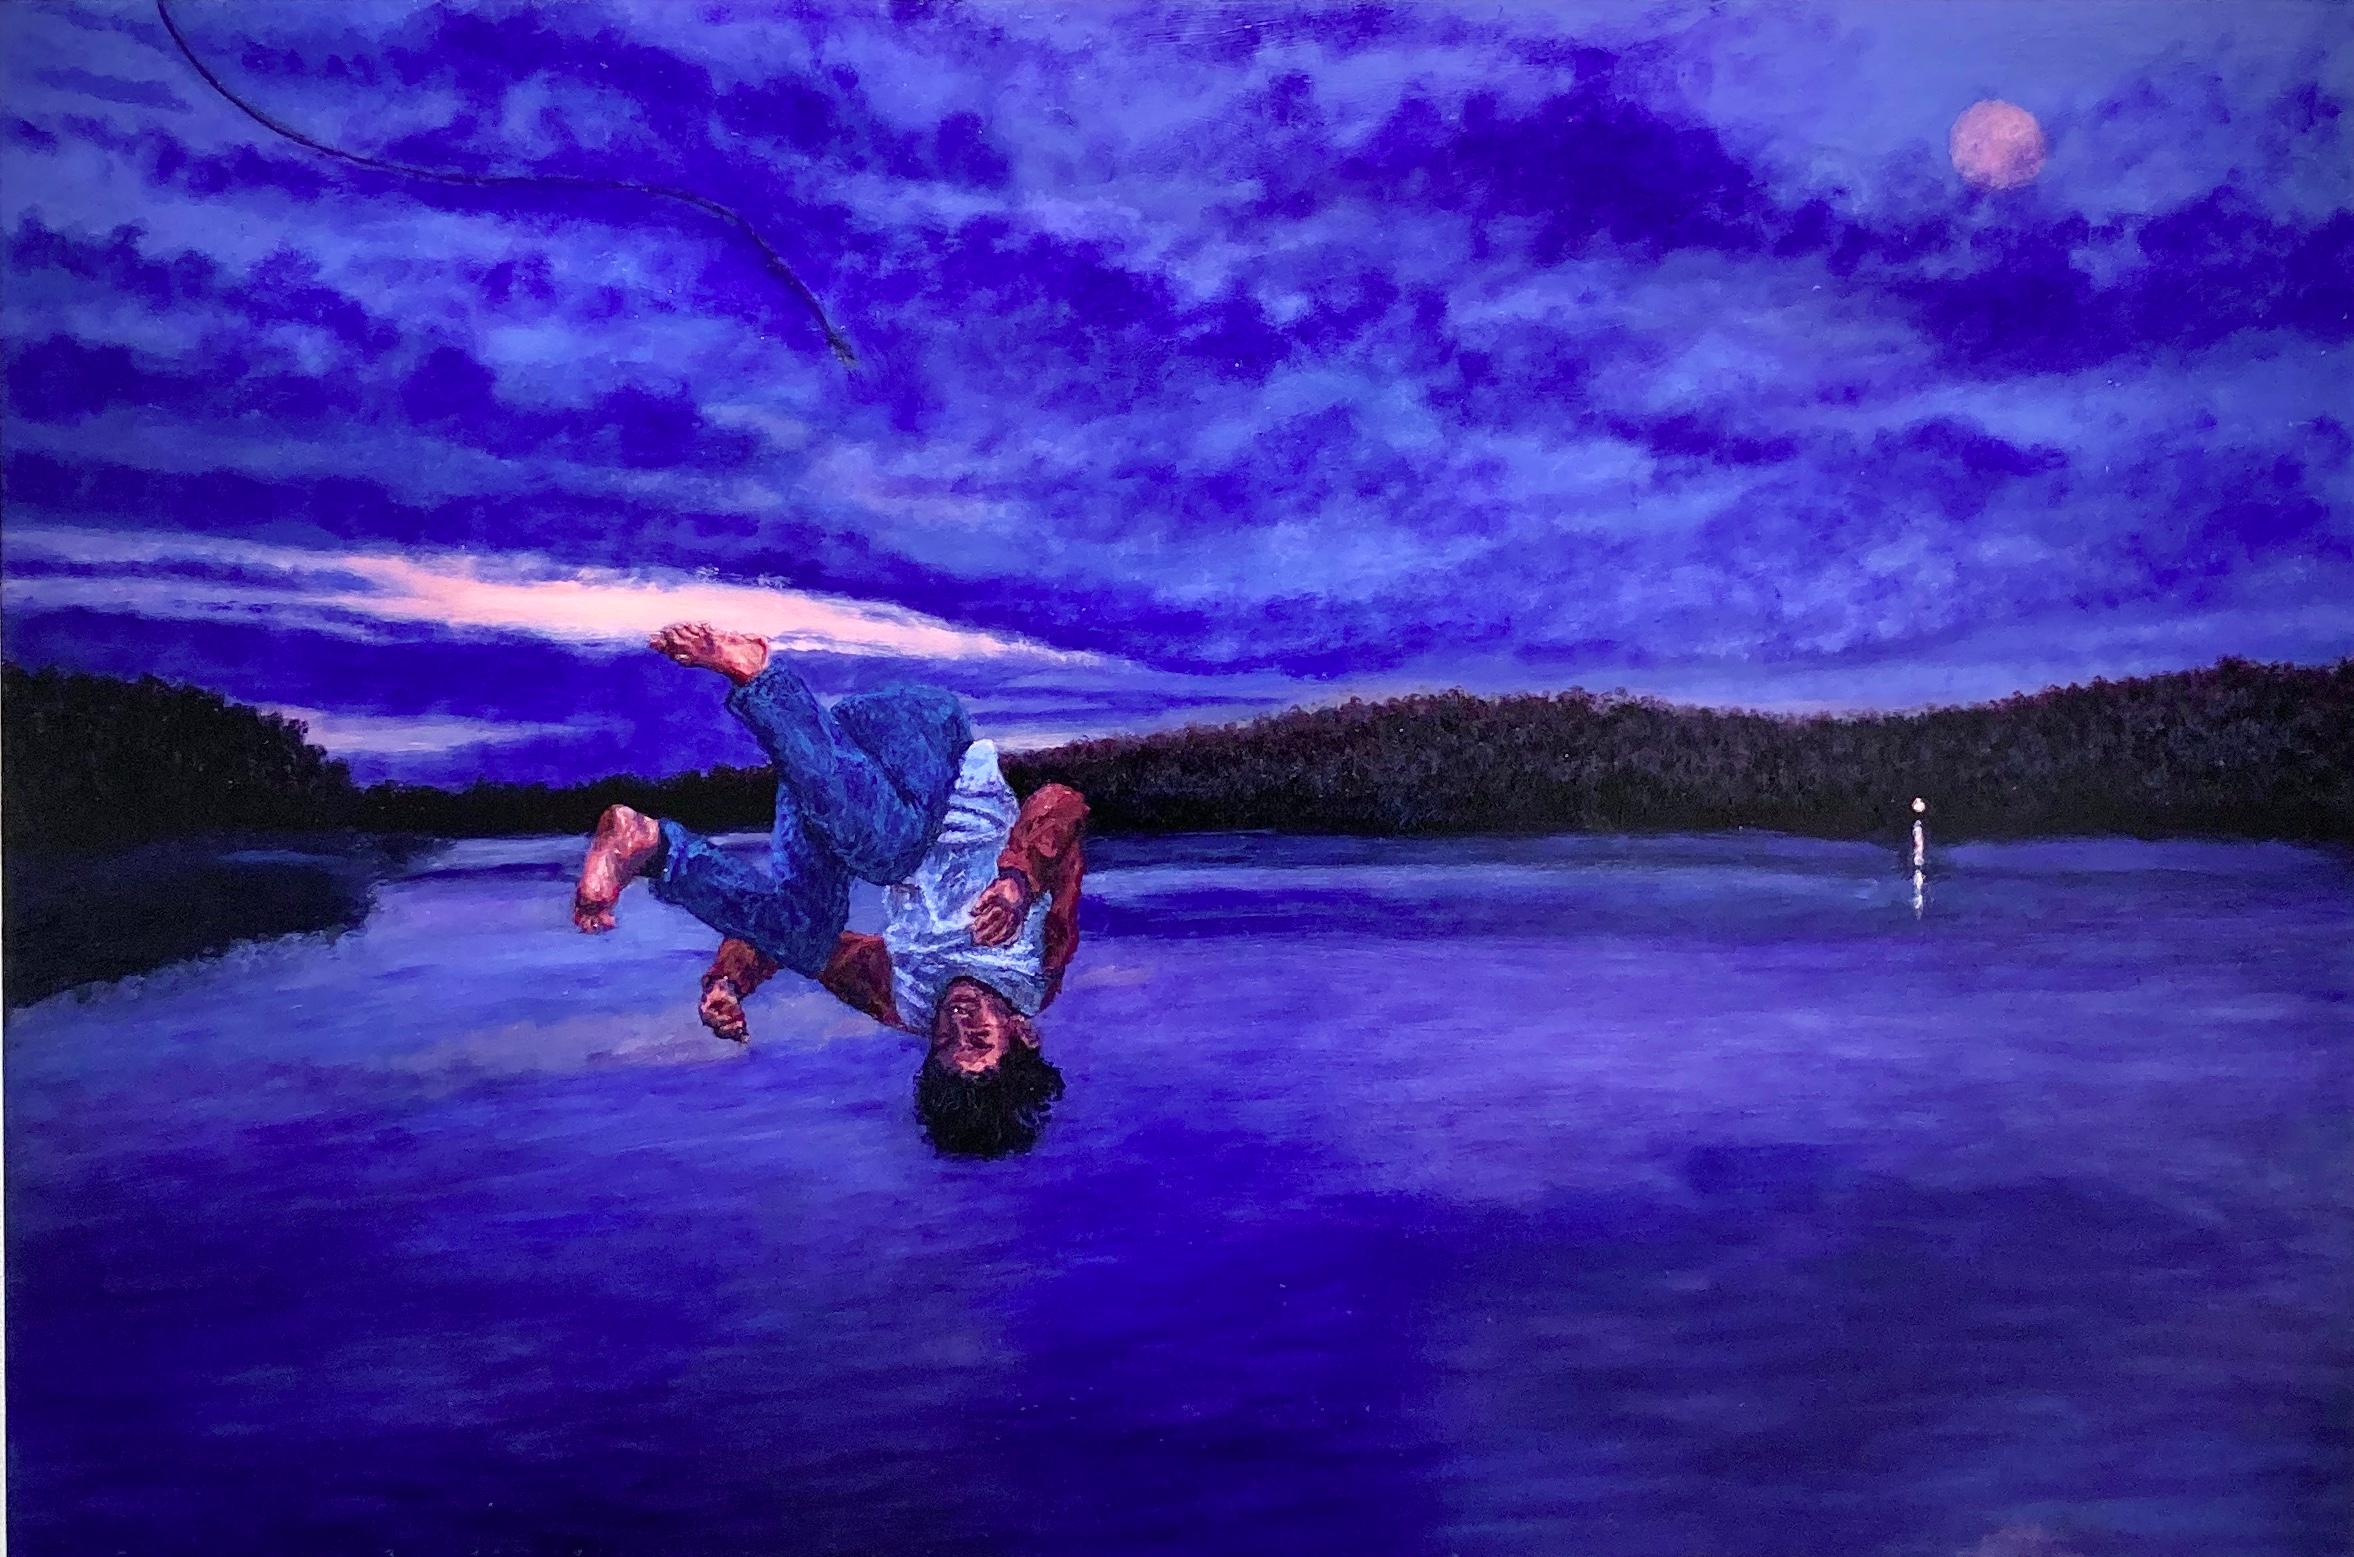 Annika Tucksmith Landscape Painting - Into Night: Figurative Painting of a Boy Jumping Into a Blue Lake Landscape 